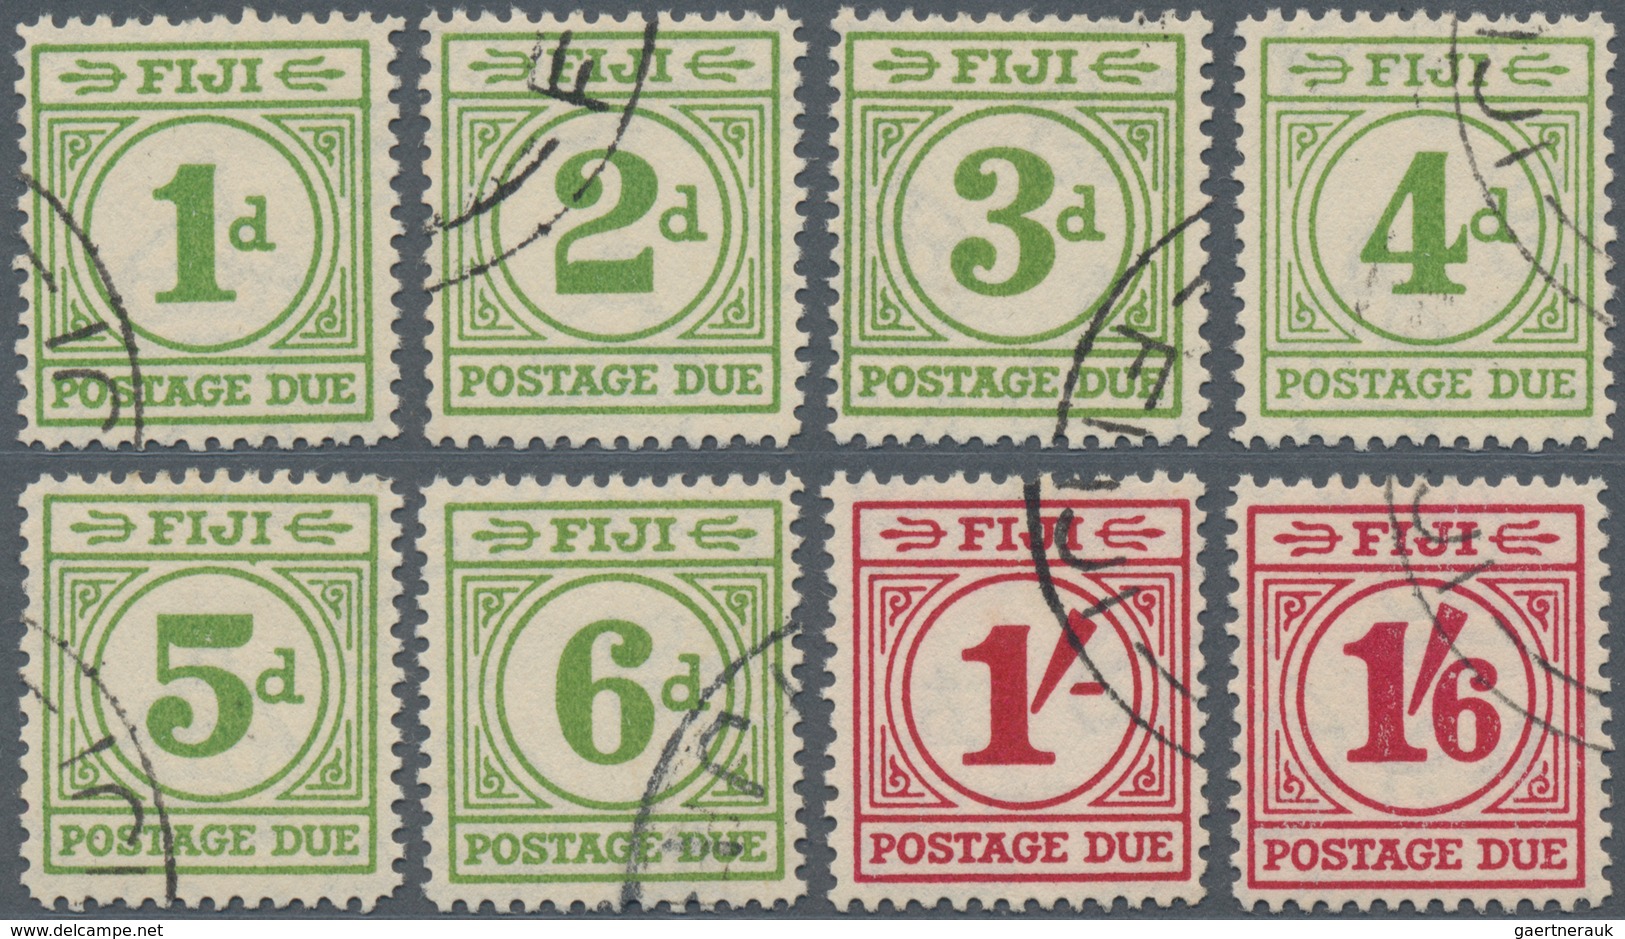 Fiji-Inseln - Portomarken: 1940 Complete Set Of 8 Postage Dues Up To 1s6d., Cancelled By Part FIJI C - Fidji (1970-...)